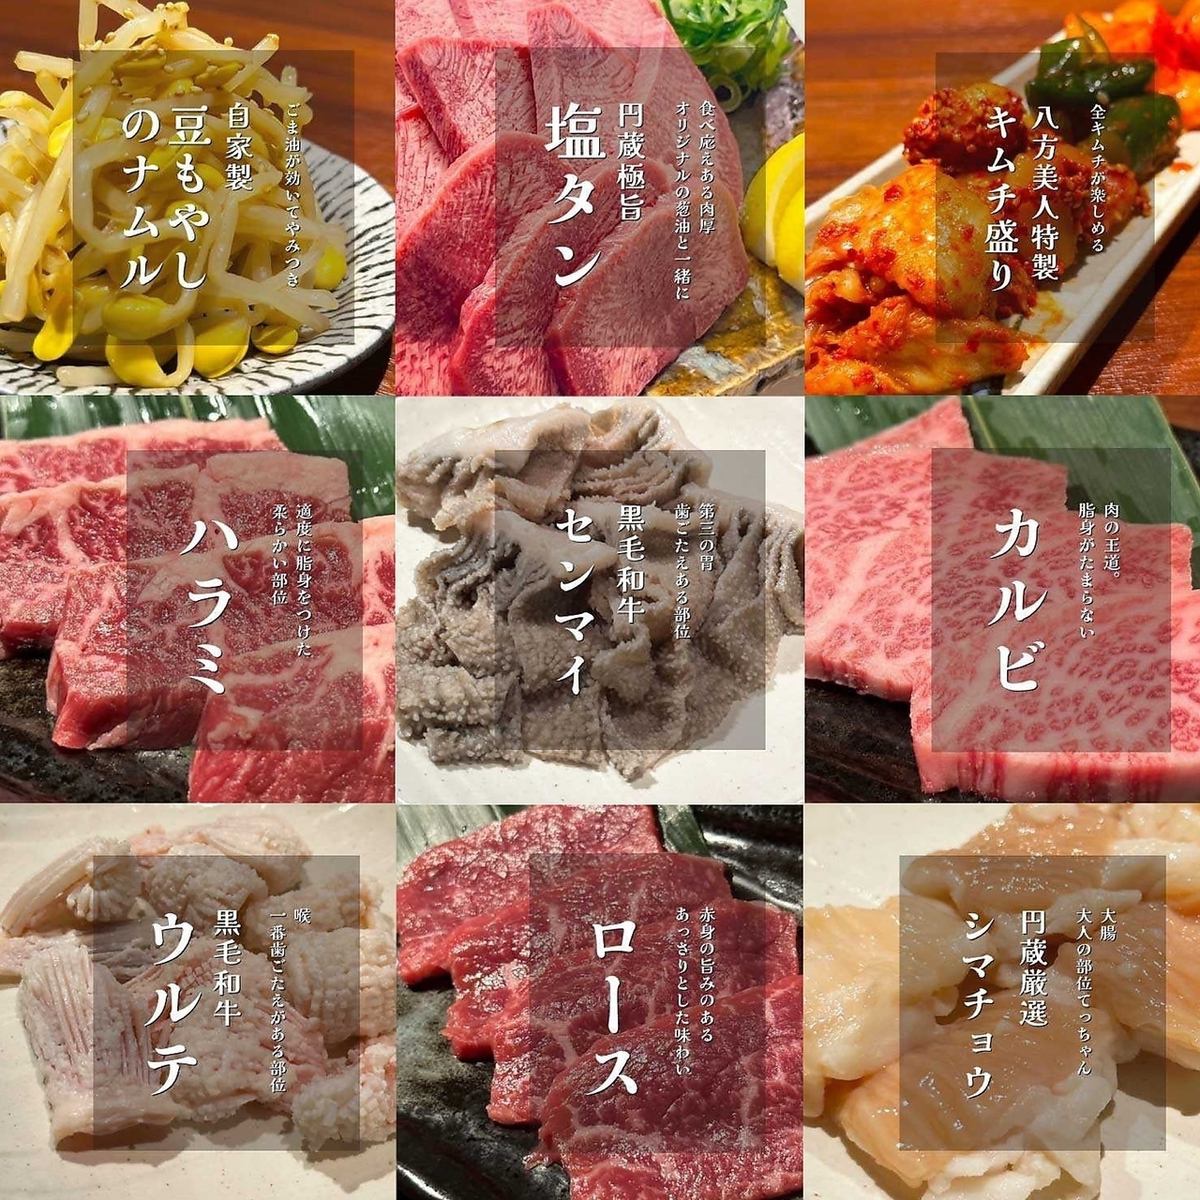 We have a wide variety of Yakiniku menu as well as special items♪